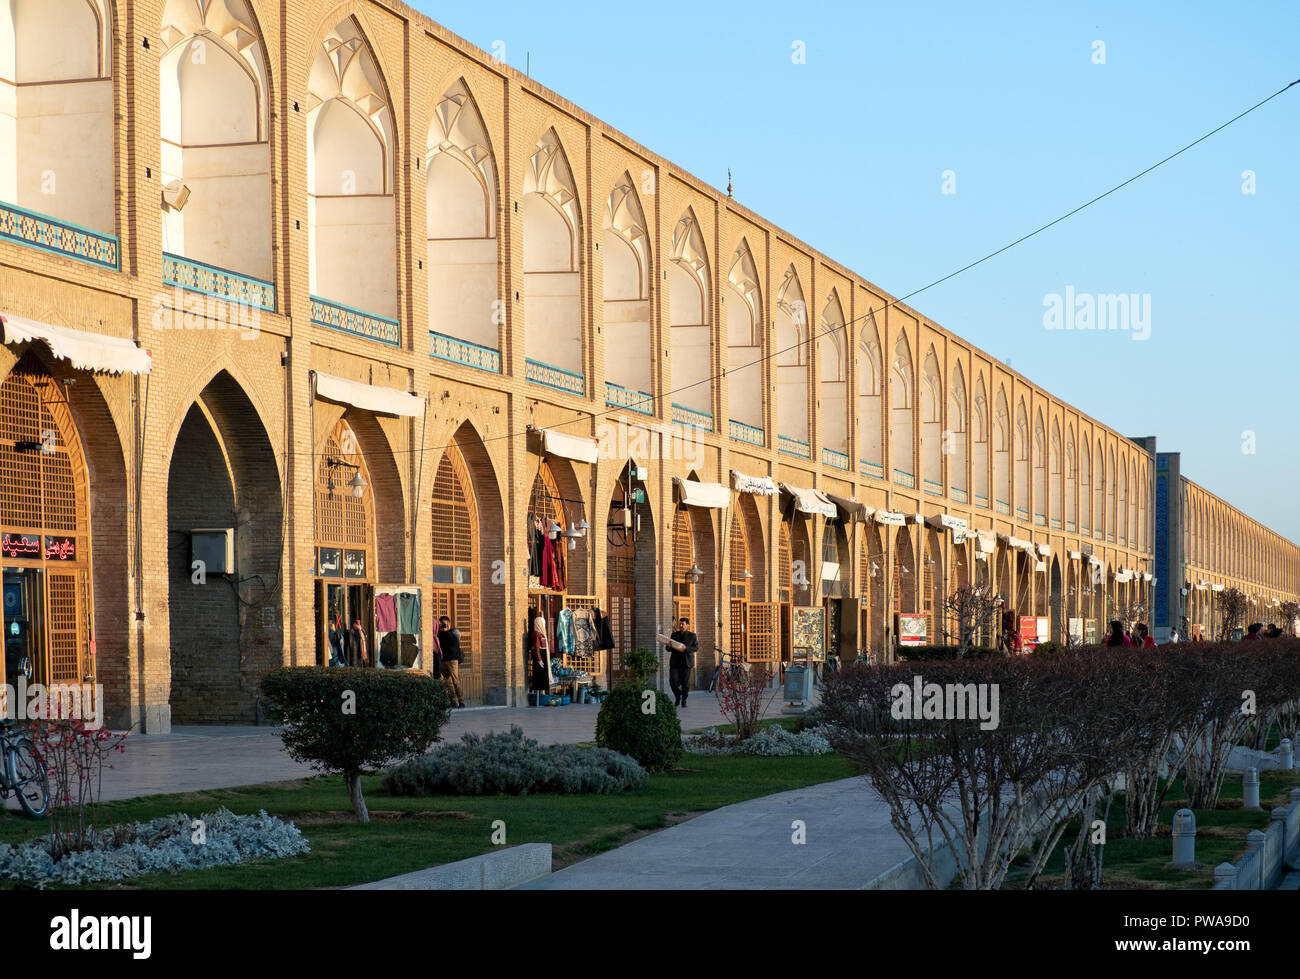 Isfahan, Iran - March 4, 2017 : Souvenir shops in Naqsh-e Jahan Square at sunset. Also known as Meidan Emam, it is now a popular tourist attraction Stock Photo